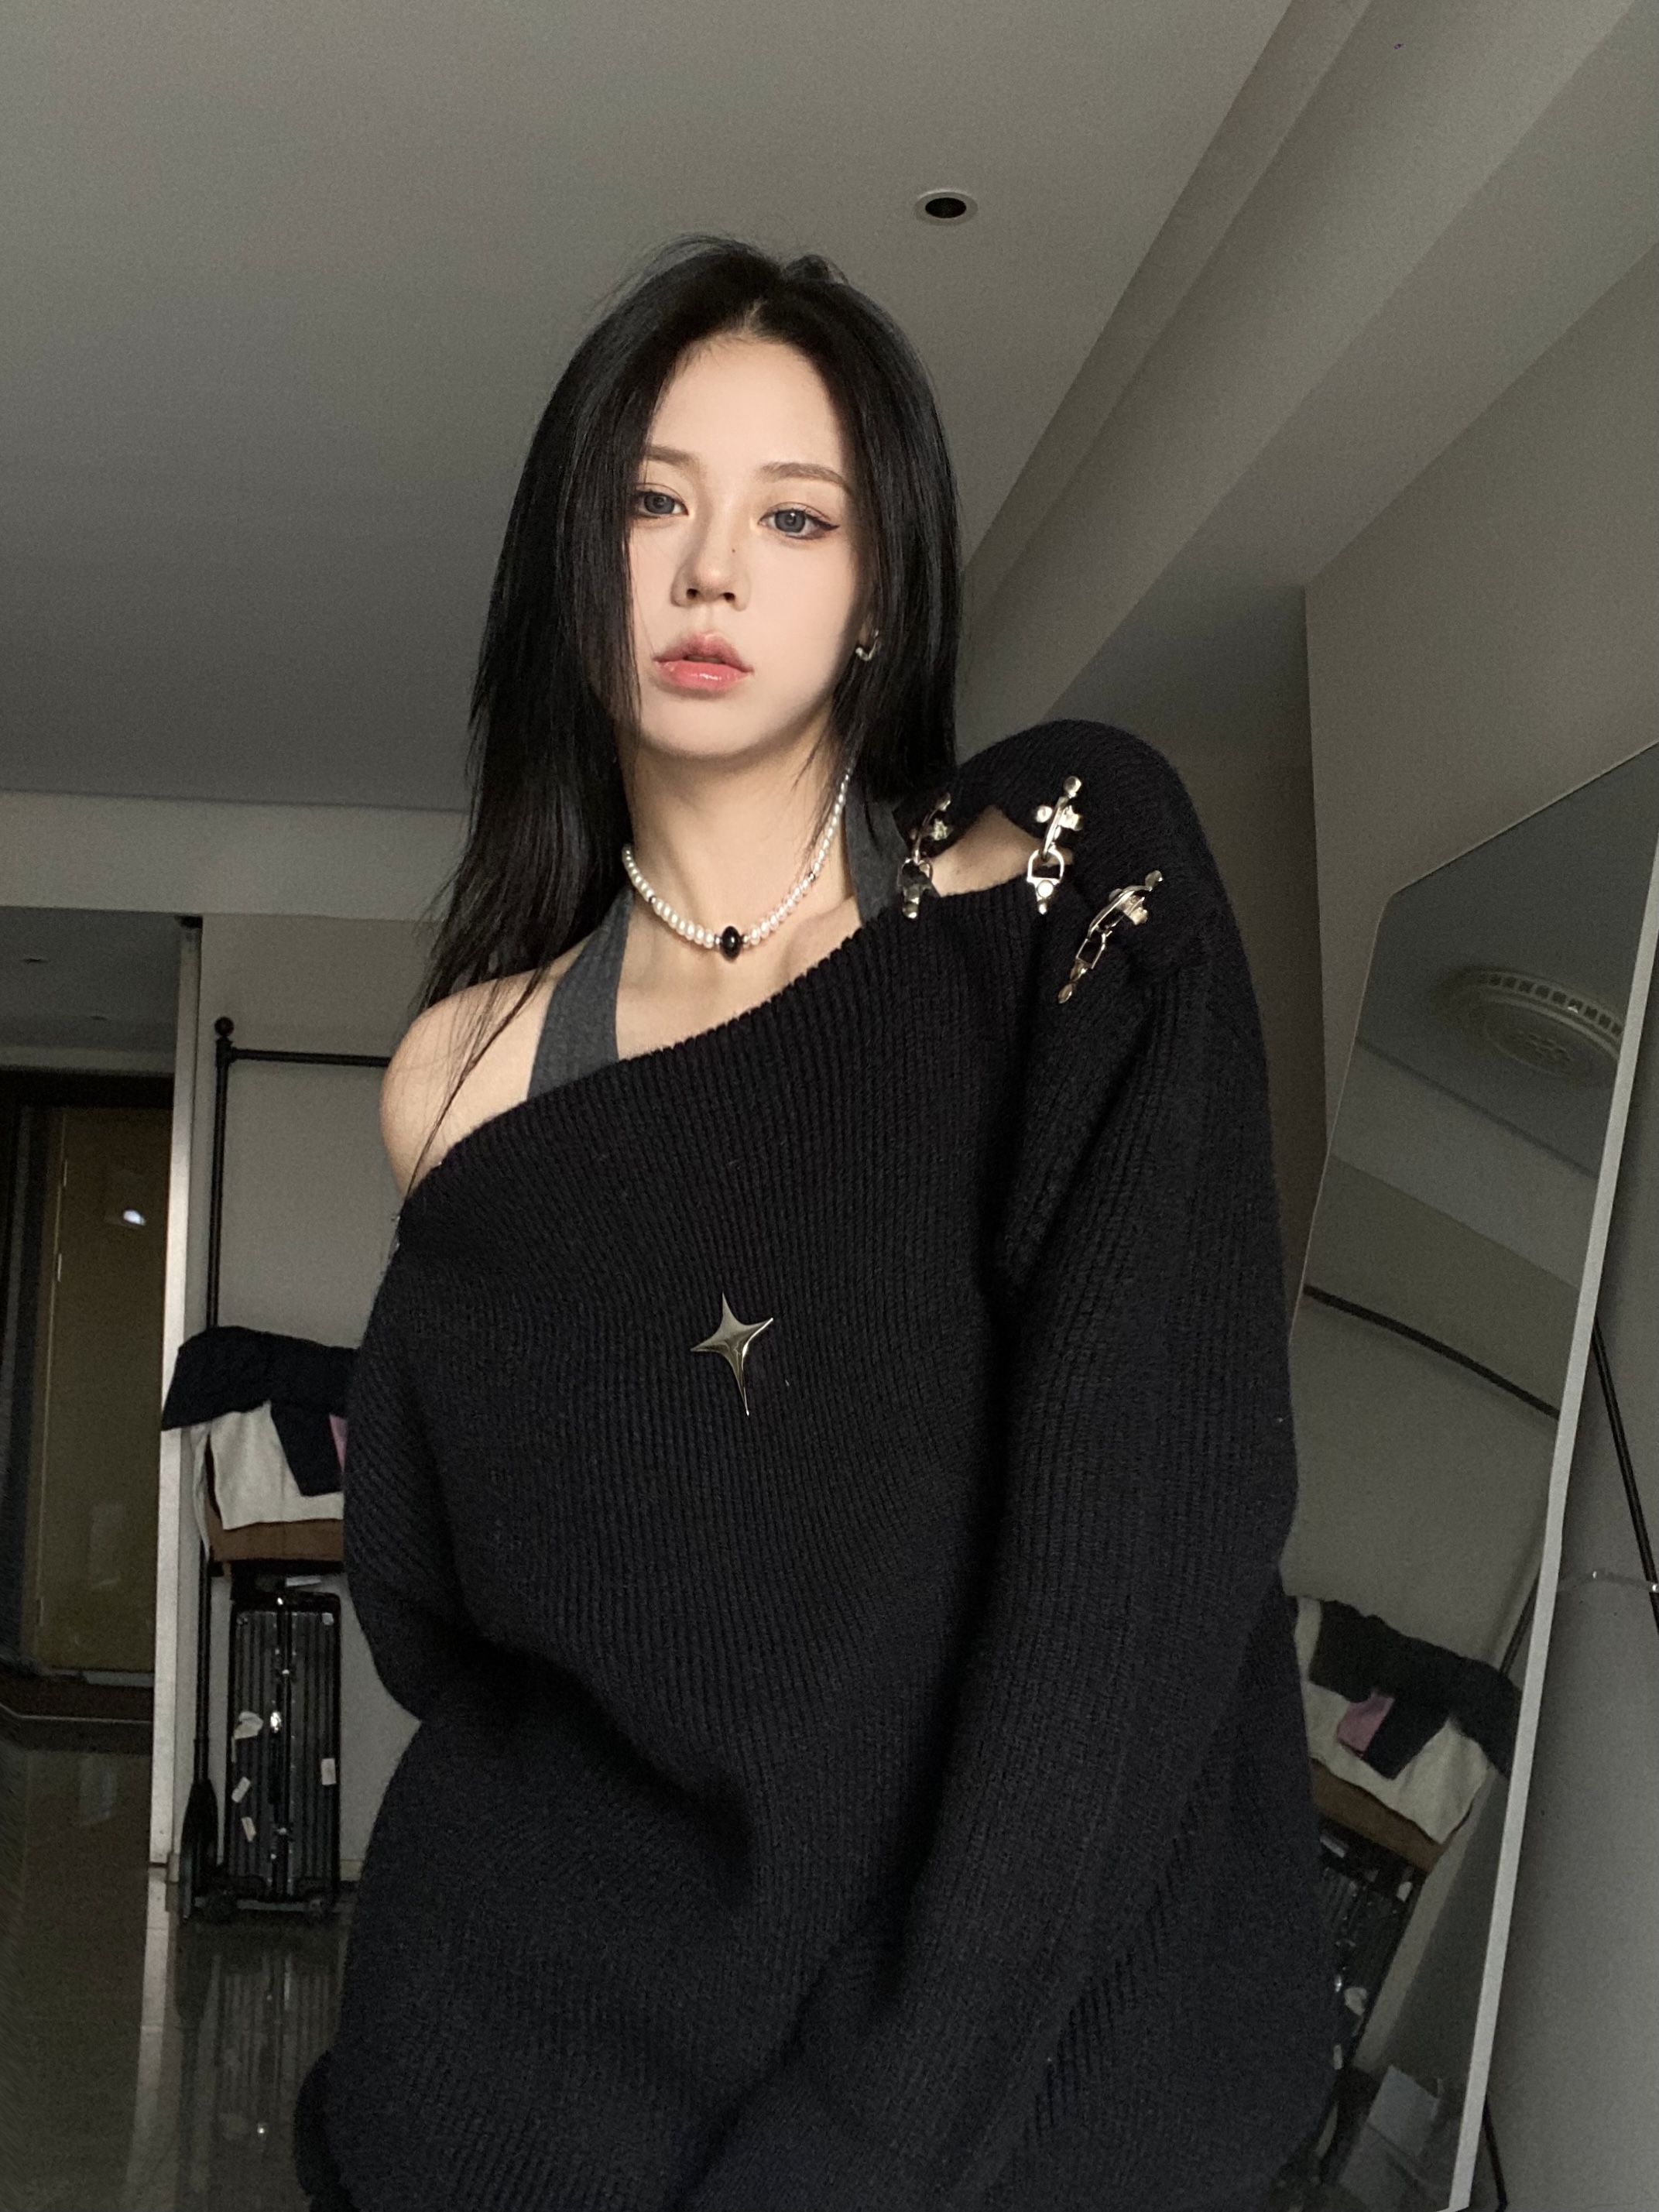 Sheep cashmere #aircraft buckle hot girl off-shoulder sweater women's autumn and winter design off-shoulder hollow atmosphere knitted top